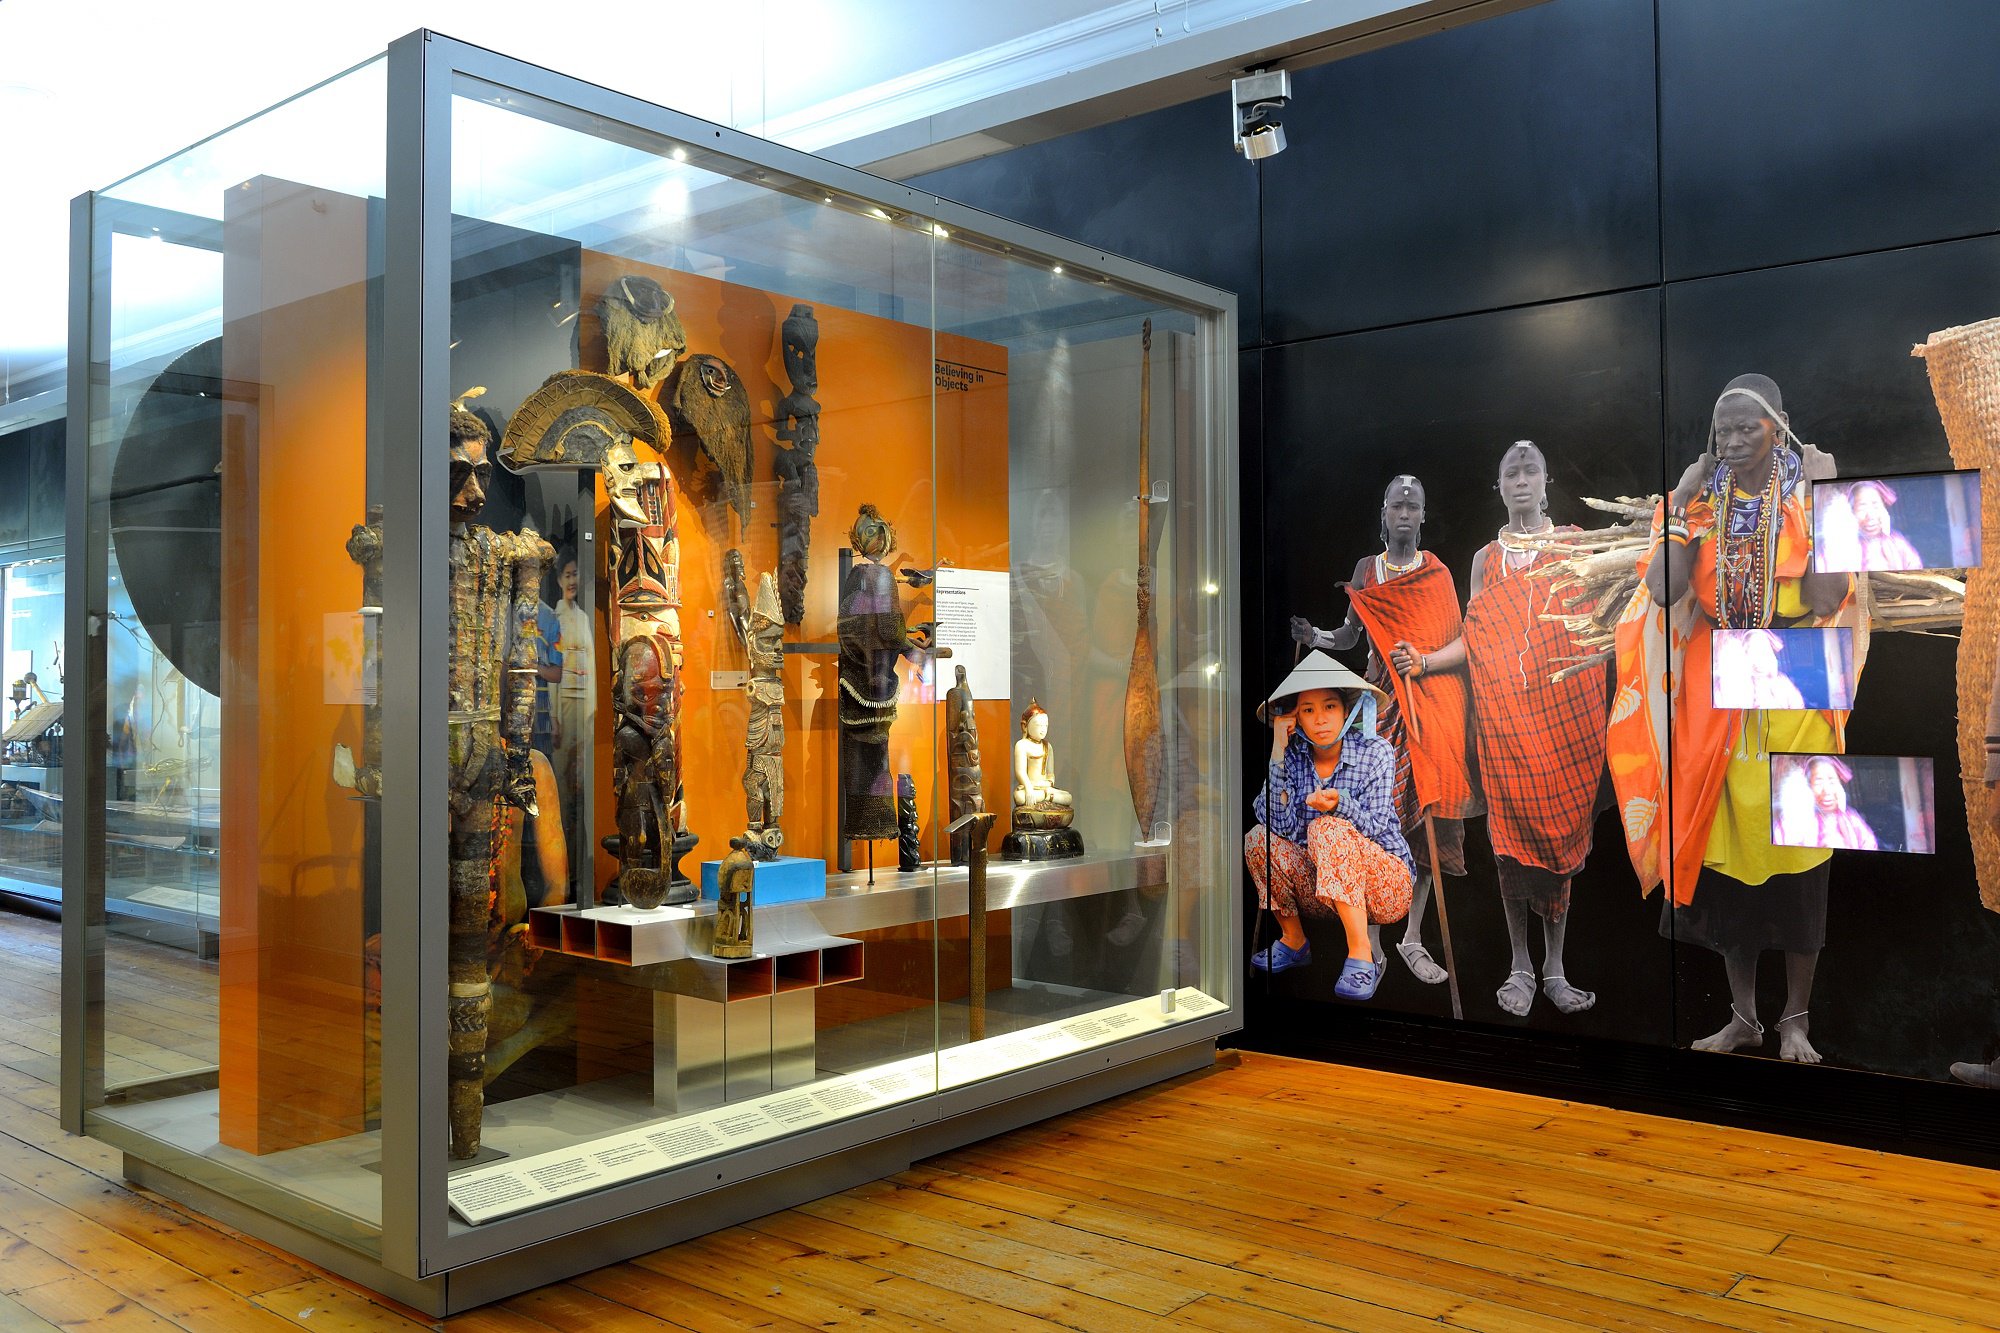 A large glass display case filled with ethnographic items. There is a graphic of Maasai women on the wall nearby.